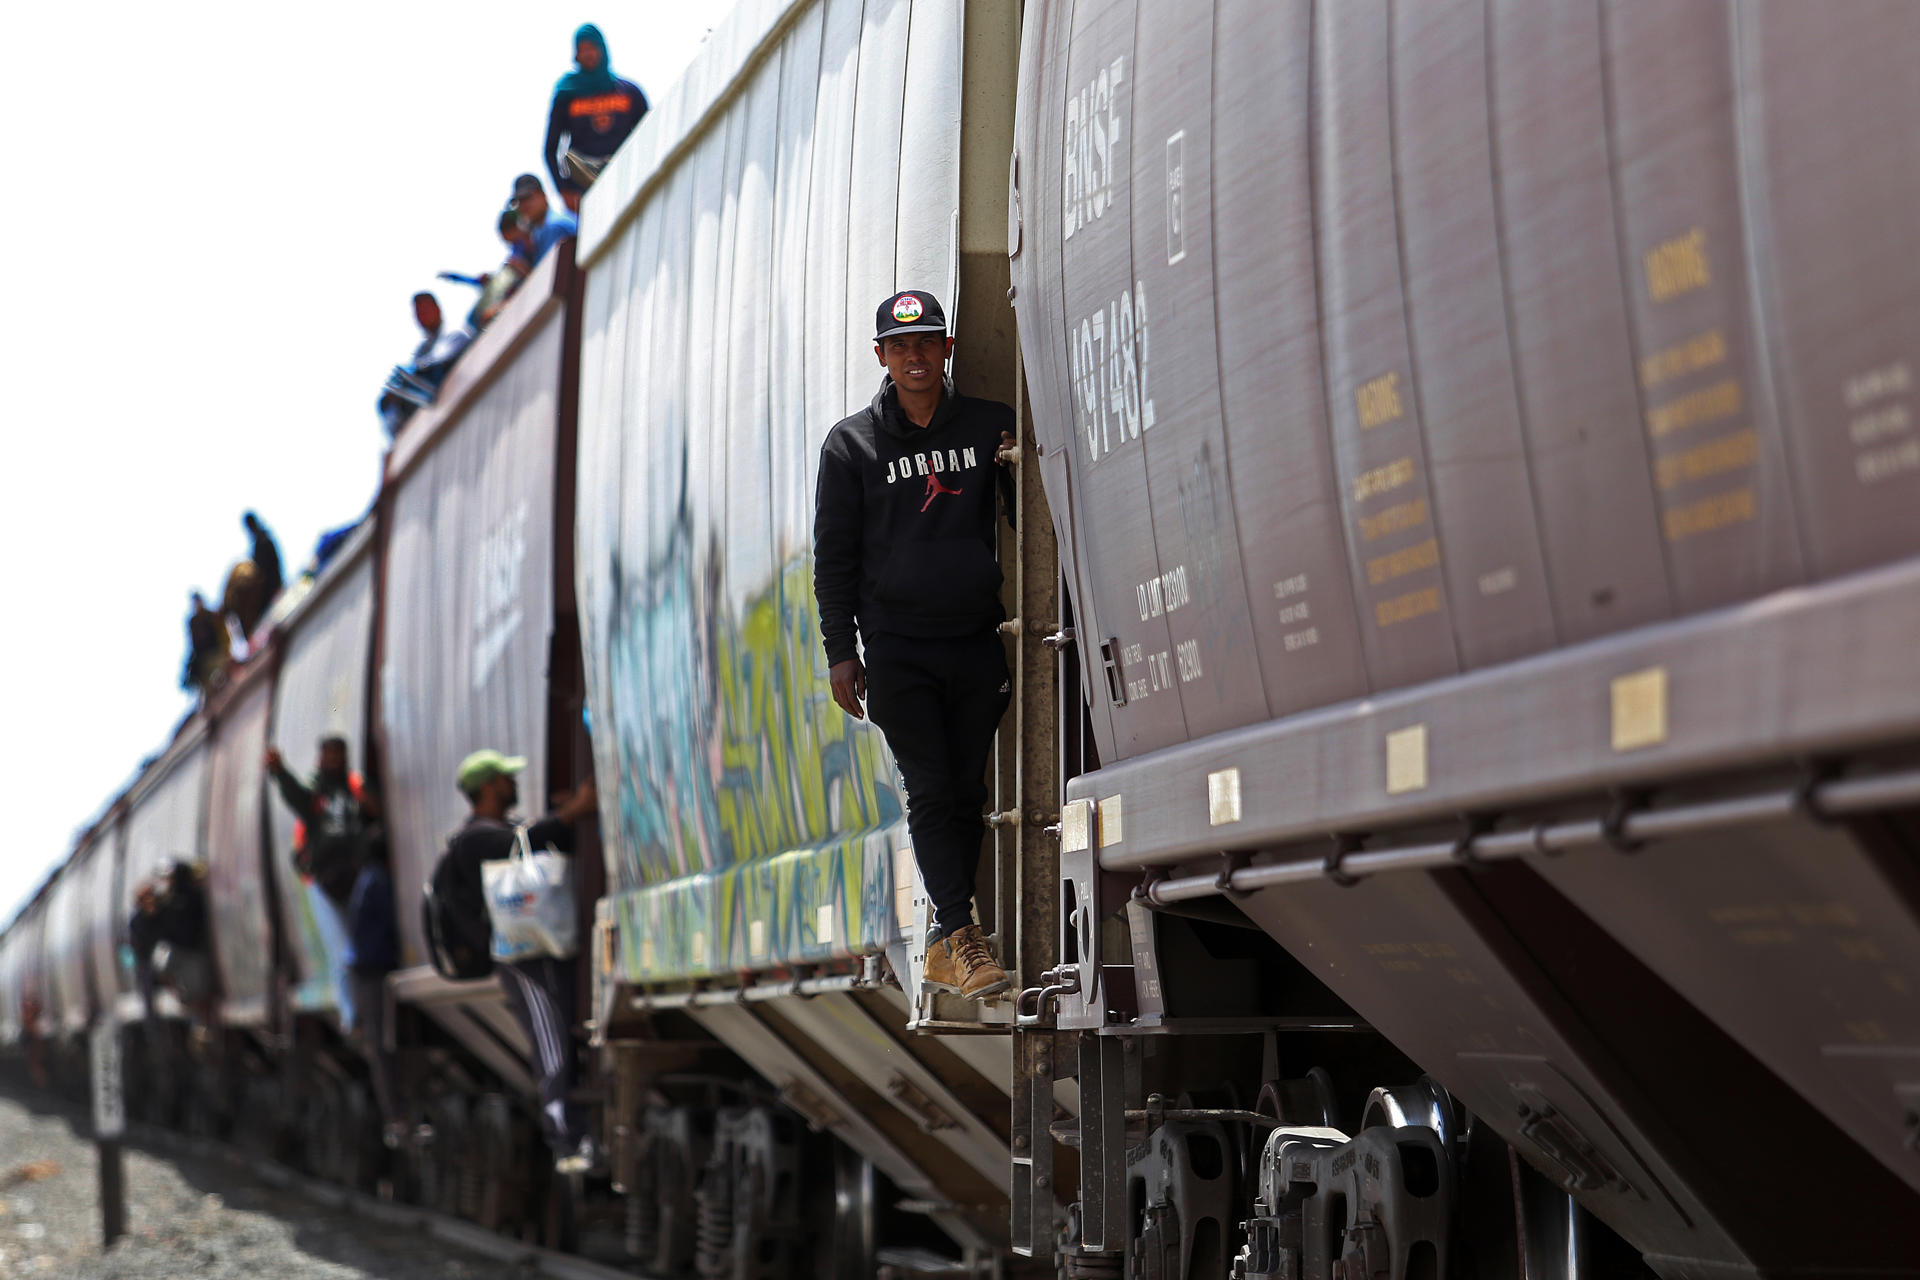 hundreds-of-migrants-who-arrived-at-the-border-between-mexico-and-the-united-states-wander-along-the-rio-grande